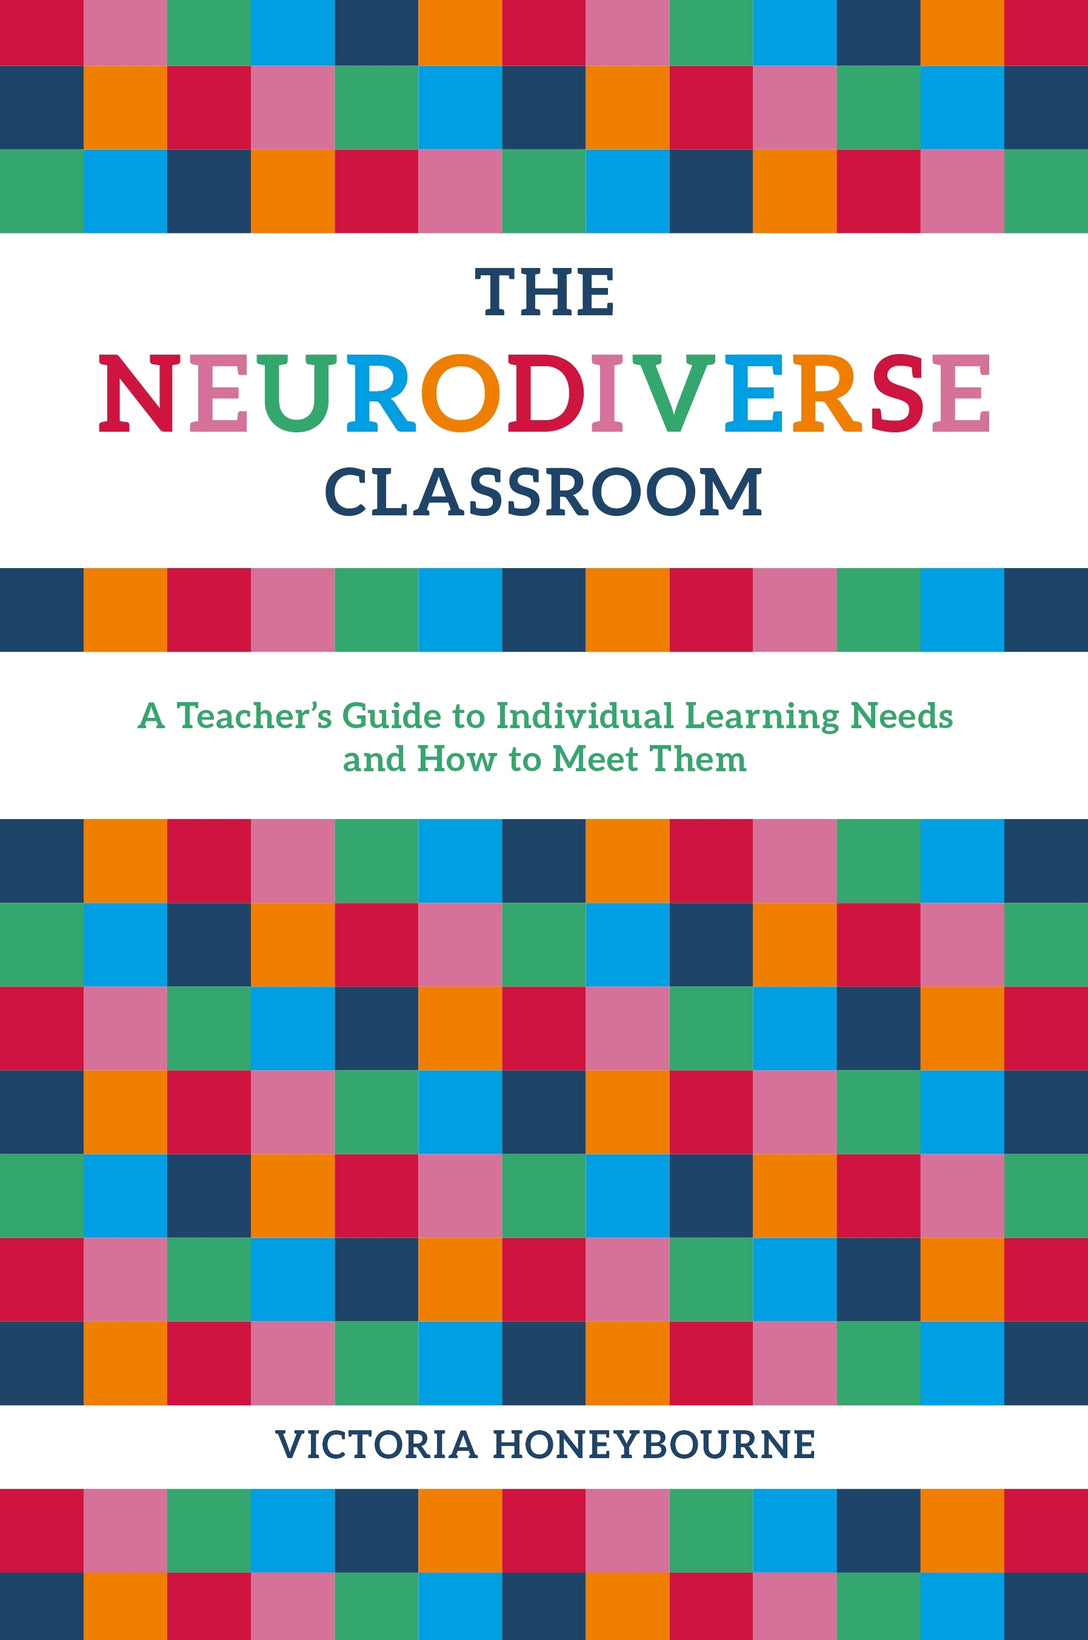 The Neurodiverse Classroom by Victoria Honeybourne